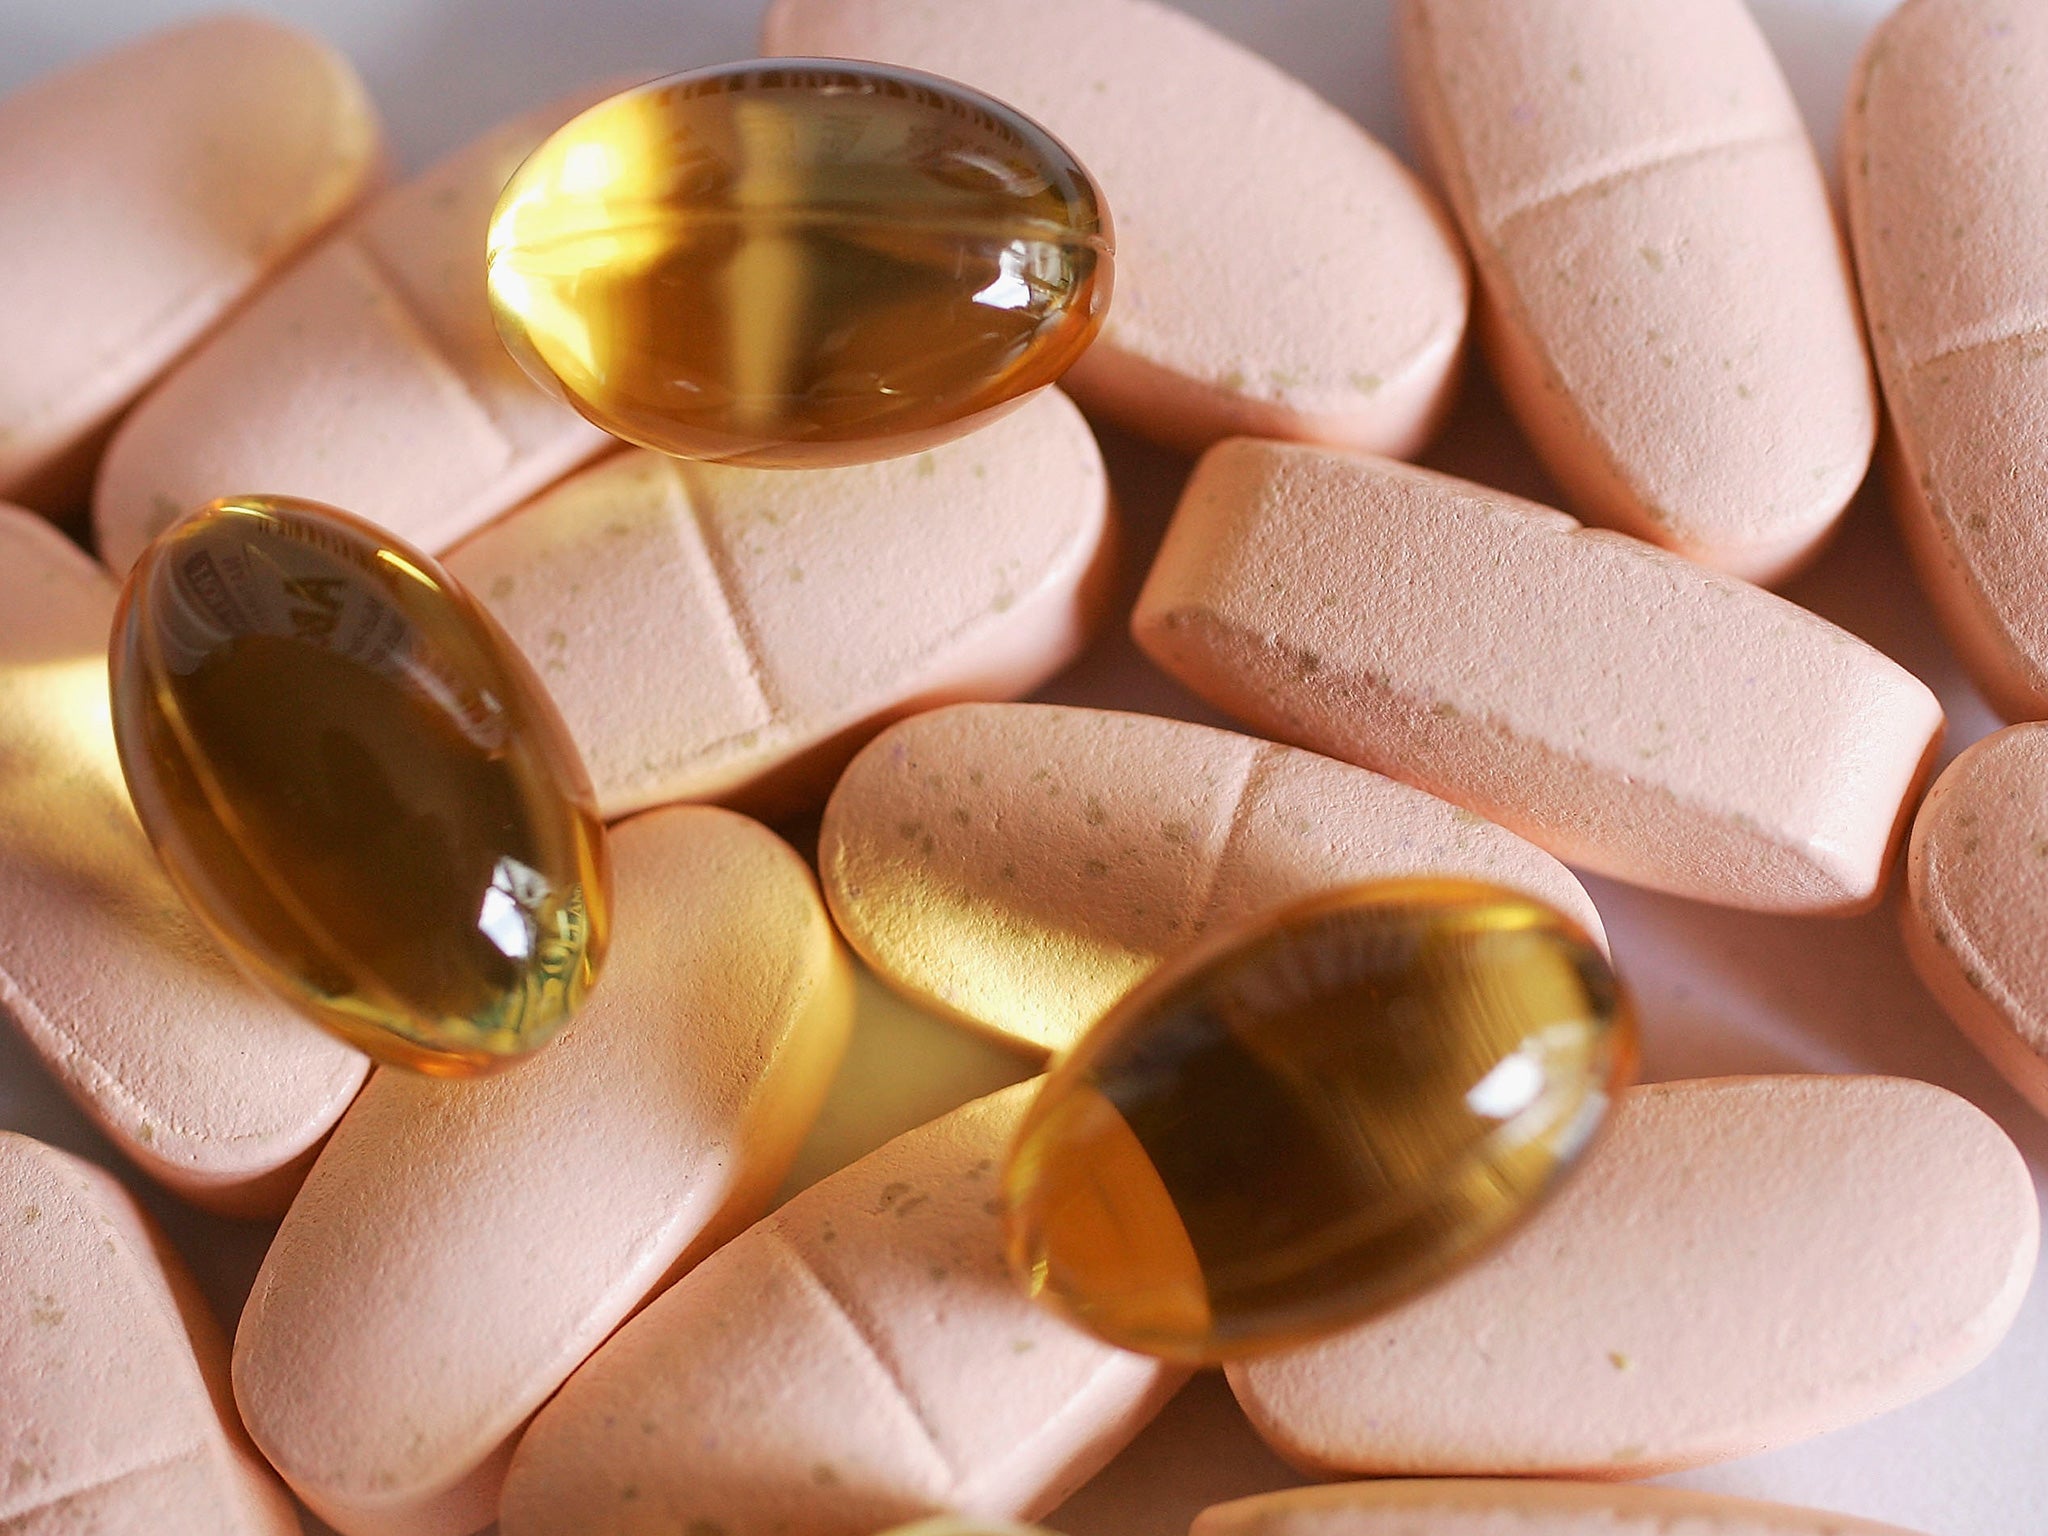 Could taking too many vitamins increase your risk of cancer?